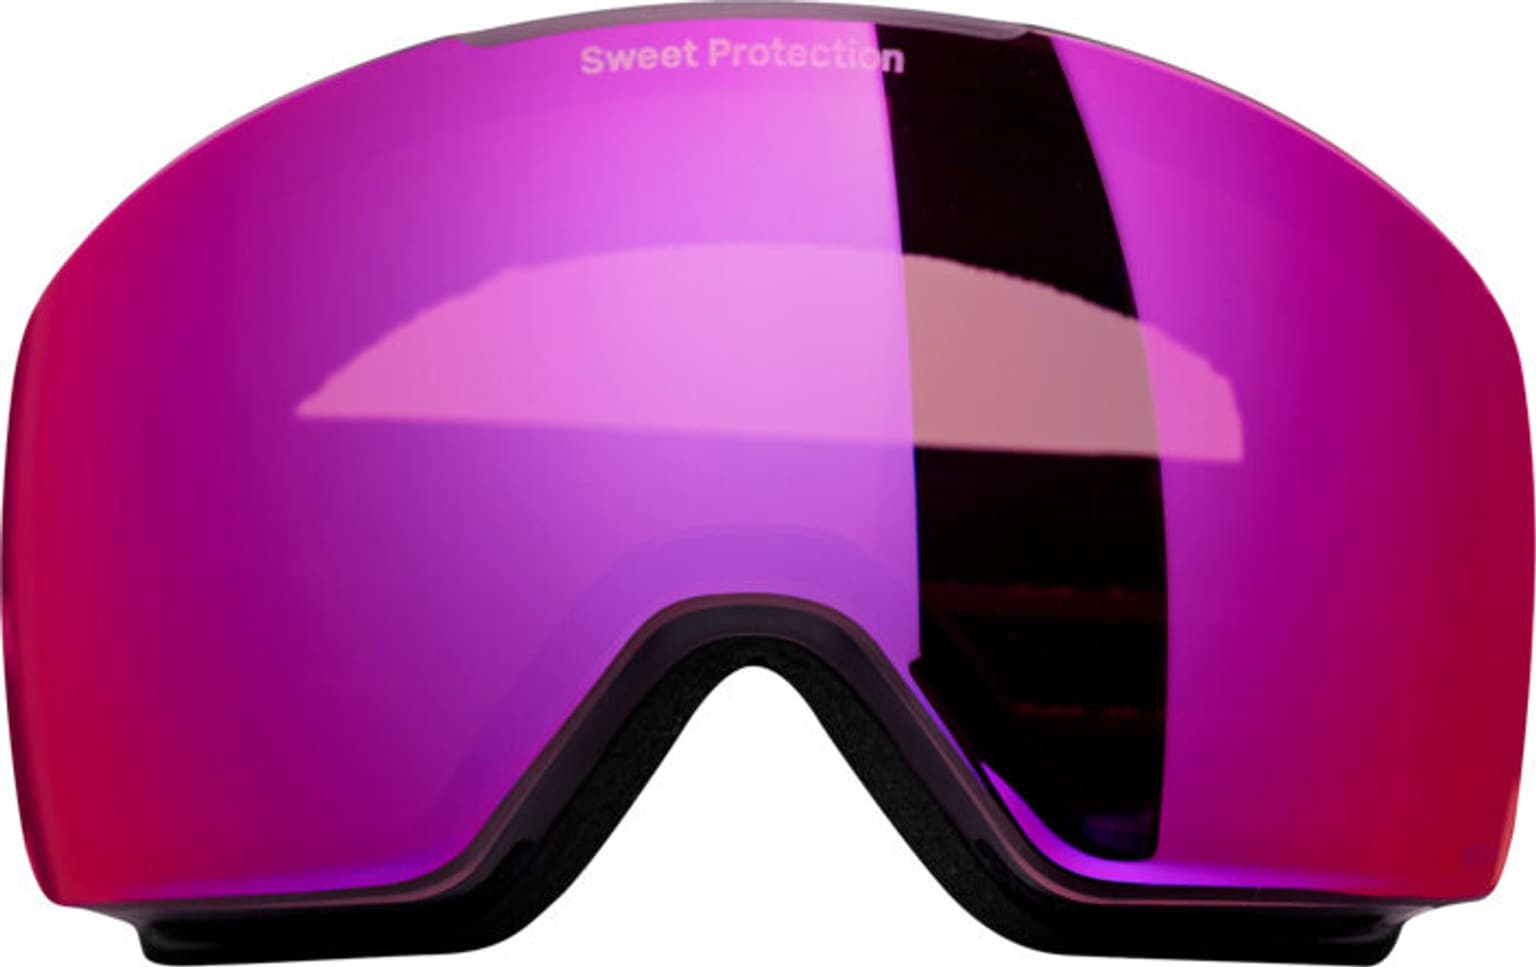 Sweet Protection Sweet Protection Connor RIG Reflect Occhiali da sci nero 2